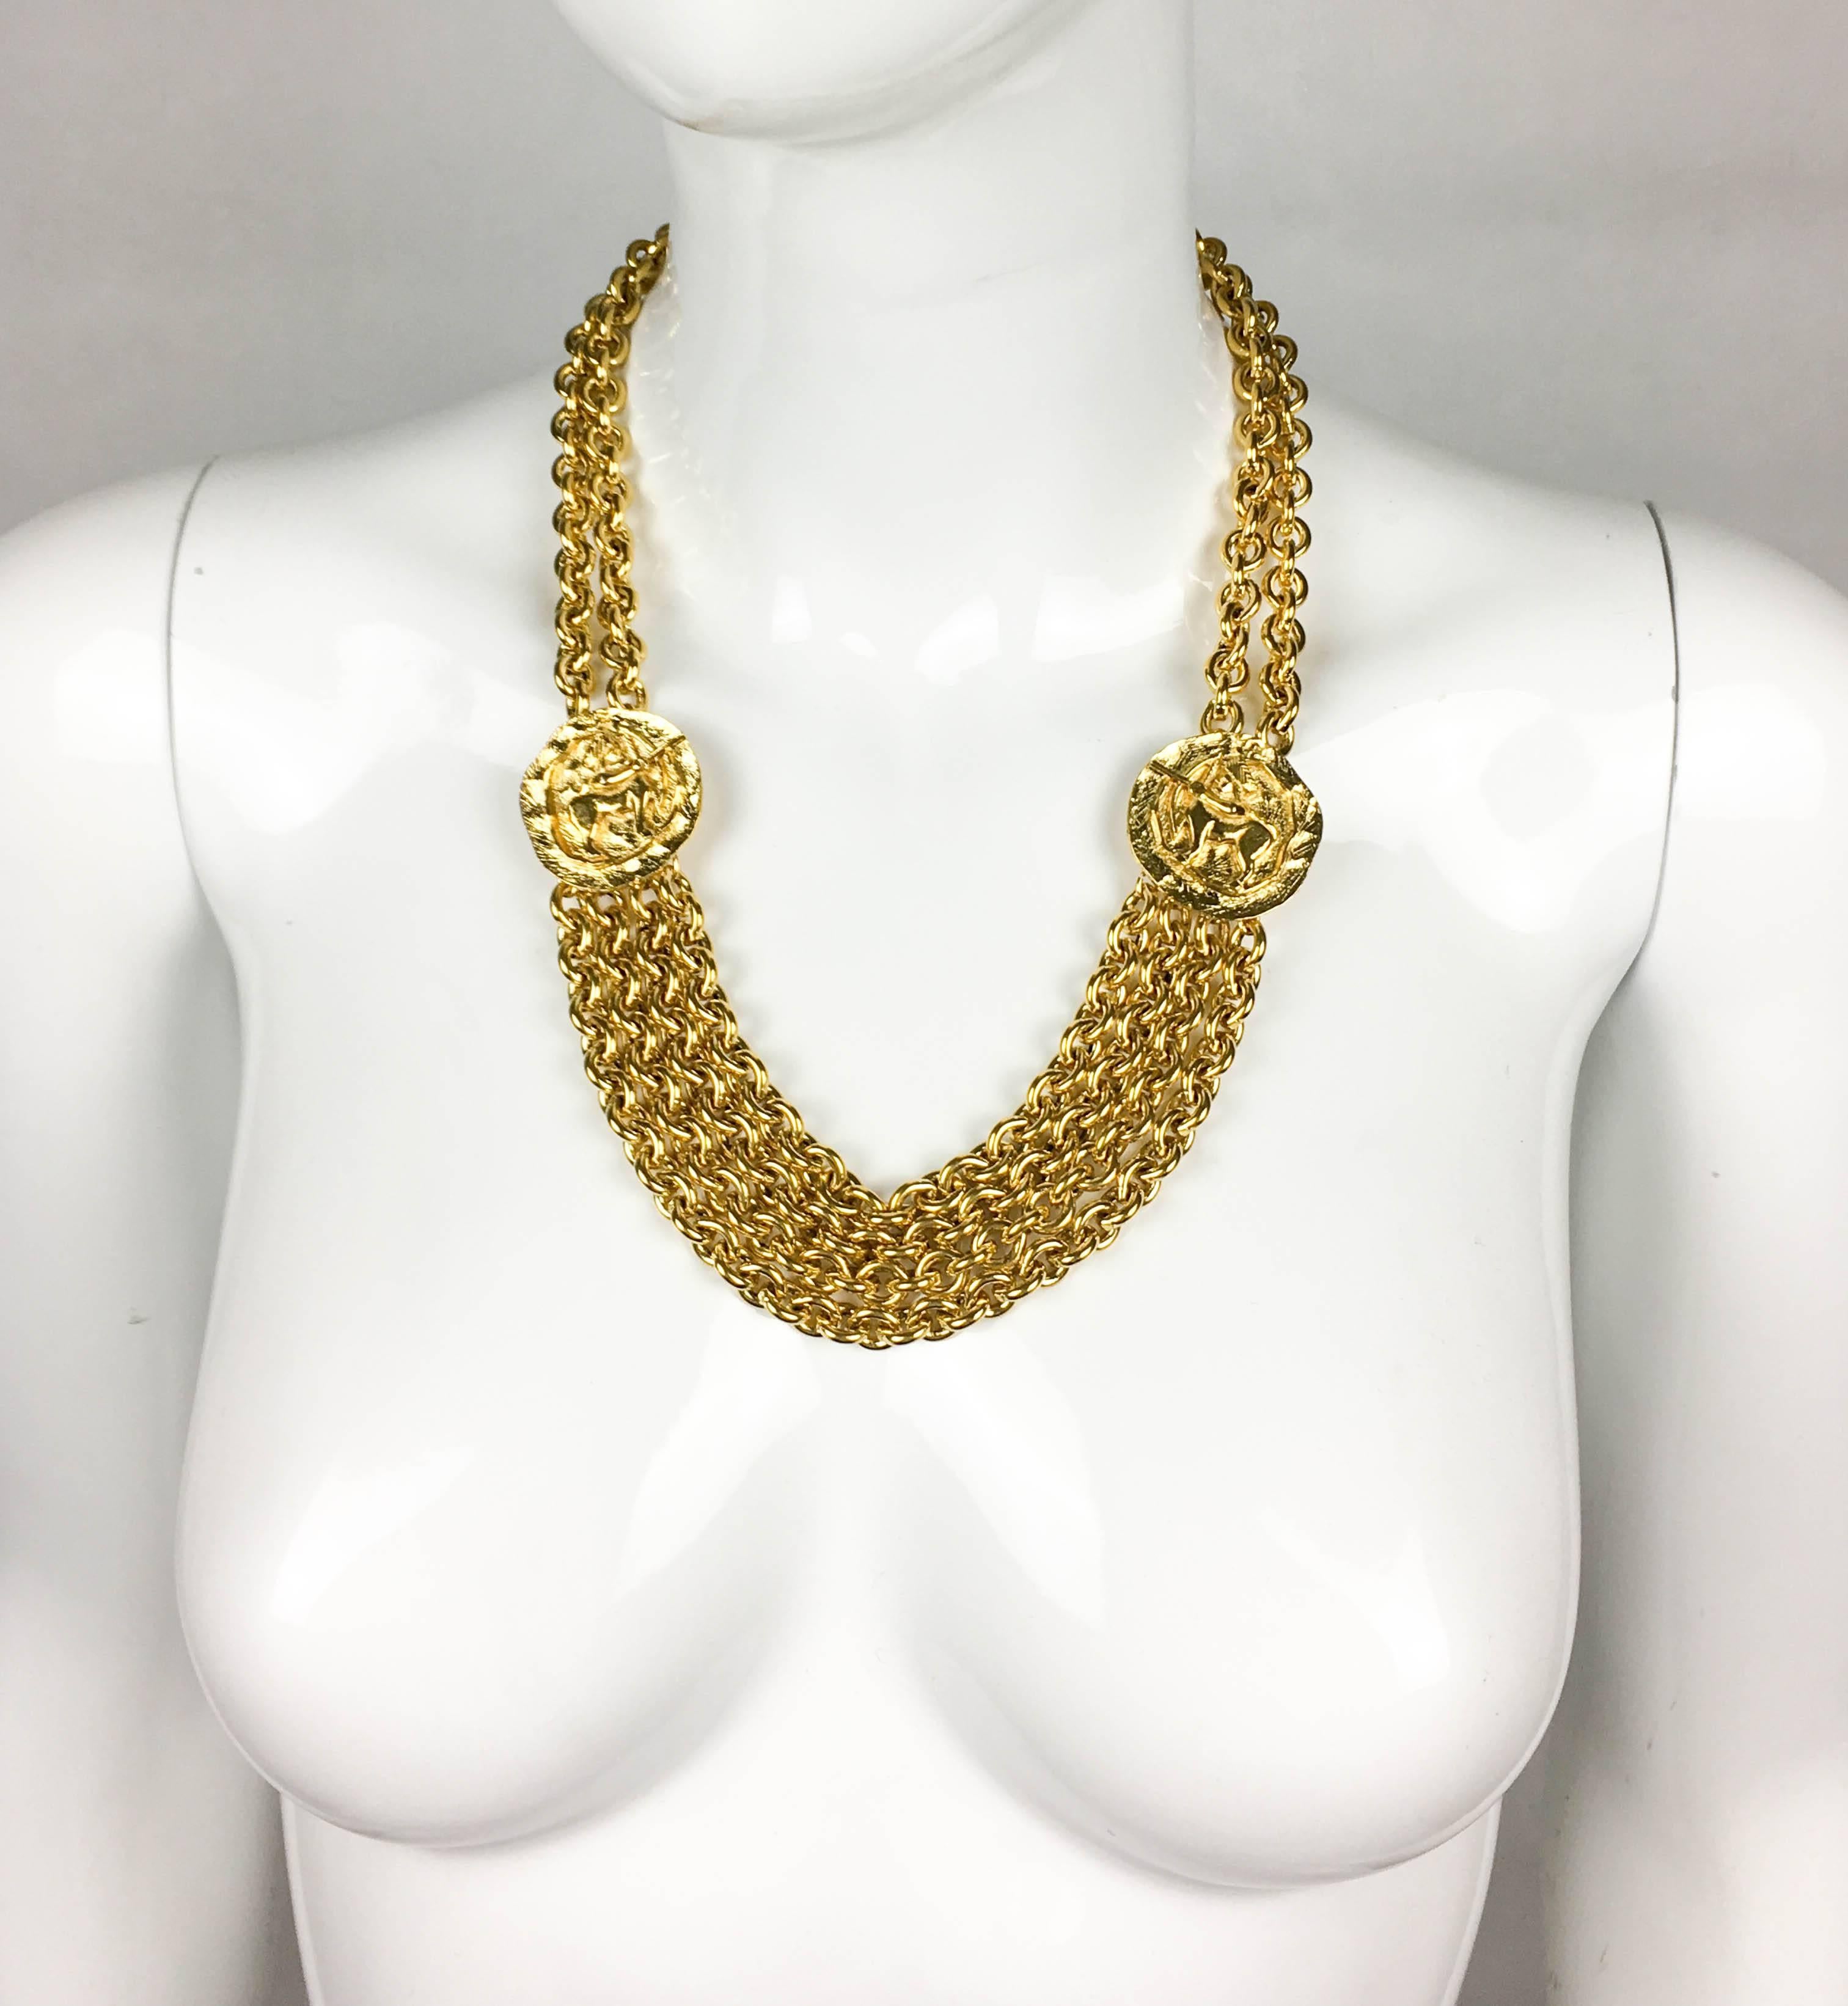 Vintage Chanel Medallion Chain Necklace. This striking necklace was created by Chanel for the 1984 collection. There are 2 gold-plated numbered medallions on each side featuring the image of a centaur, with a gilt double chains going up to the ‘CC’